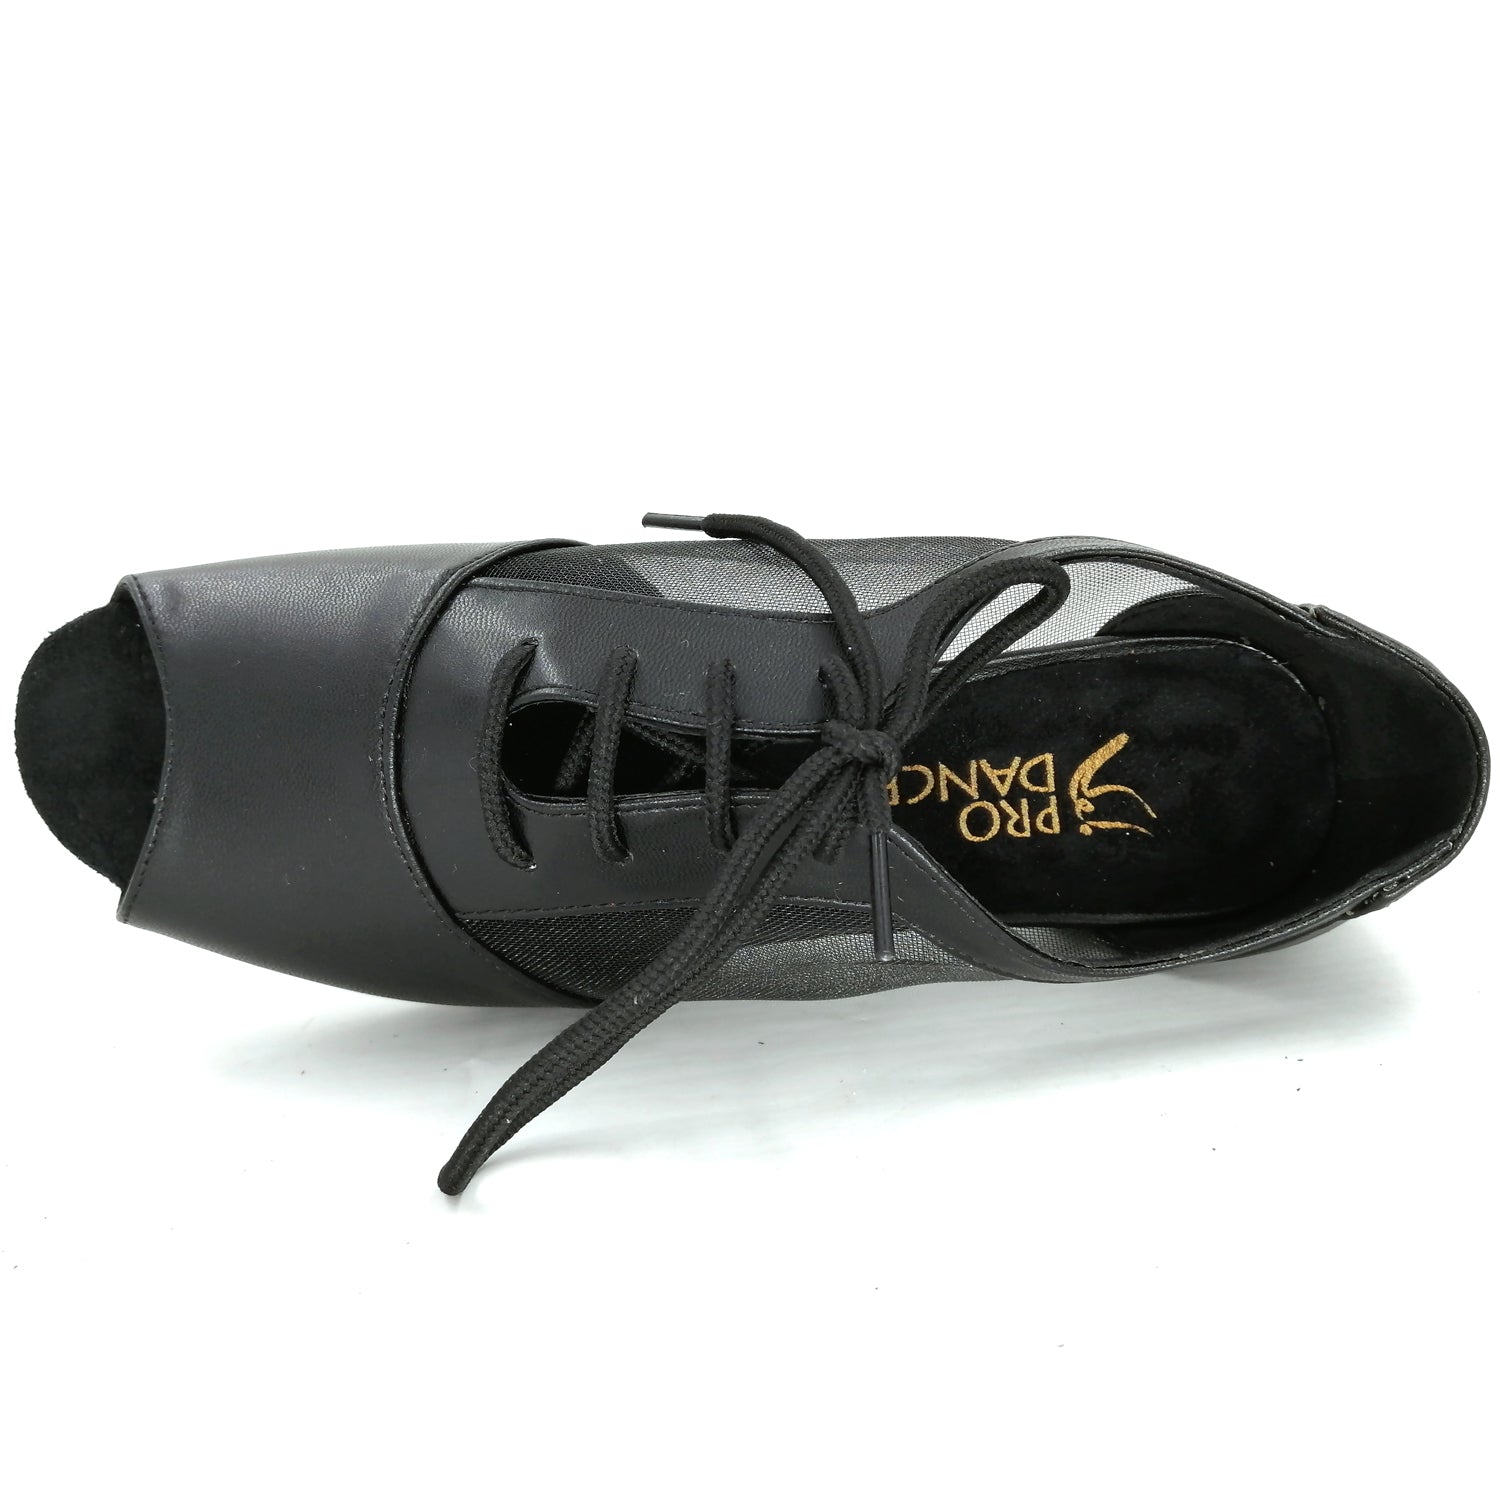 Women Ballroom Dancing Shoes with Suede Sole, Lace-up Peep-toe Design in Black for Tango Latin Practice (PD1141D)3